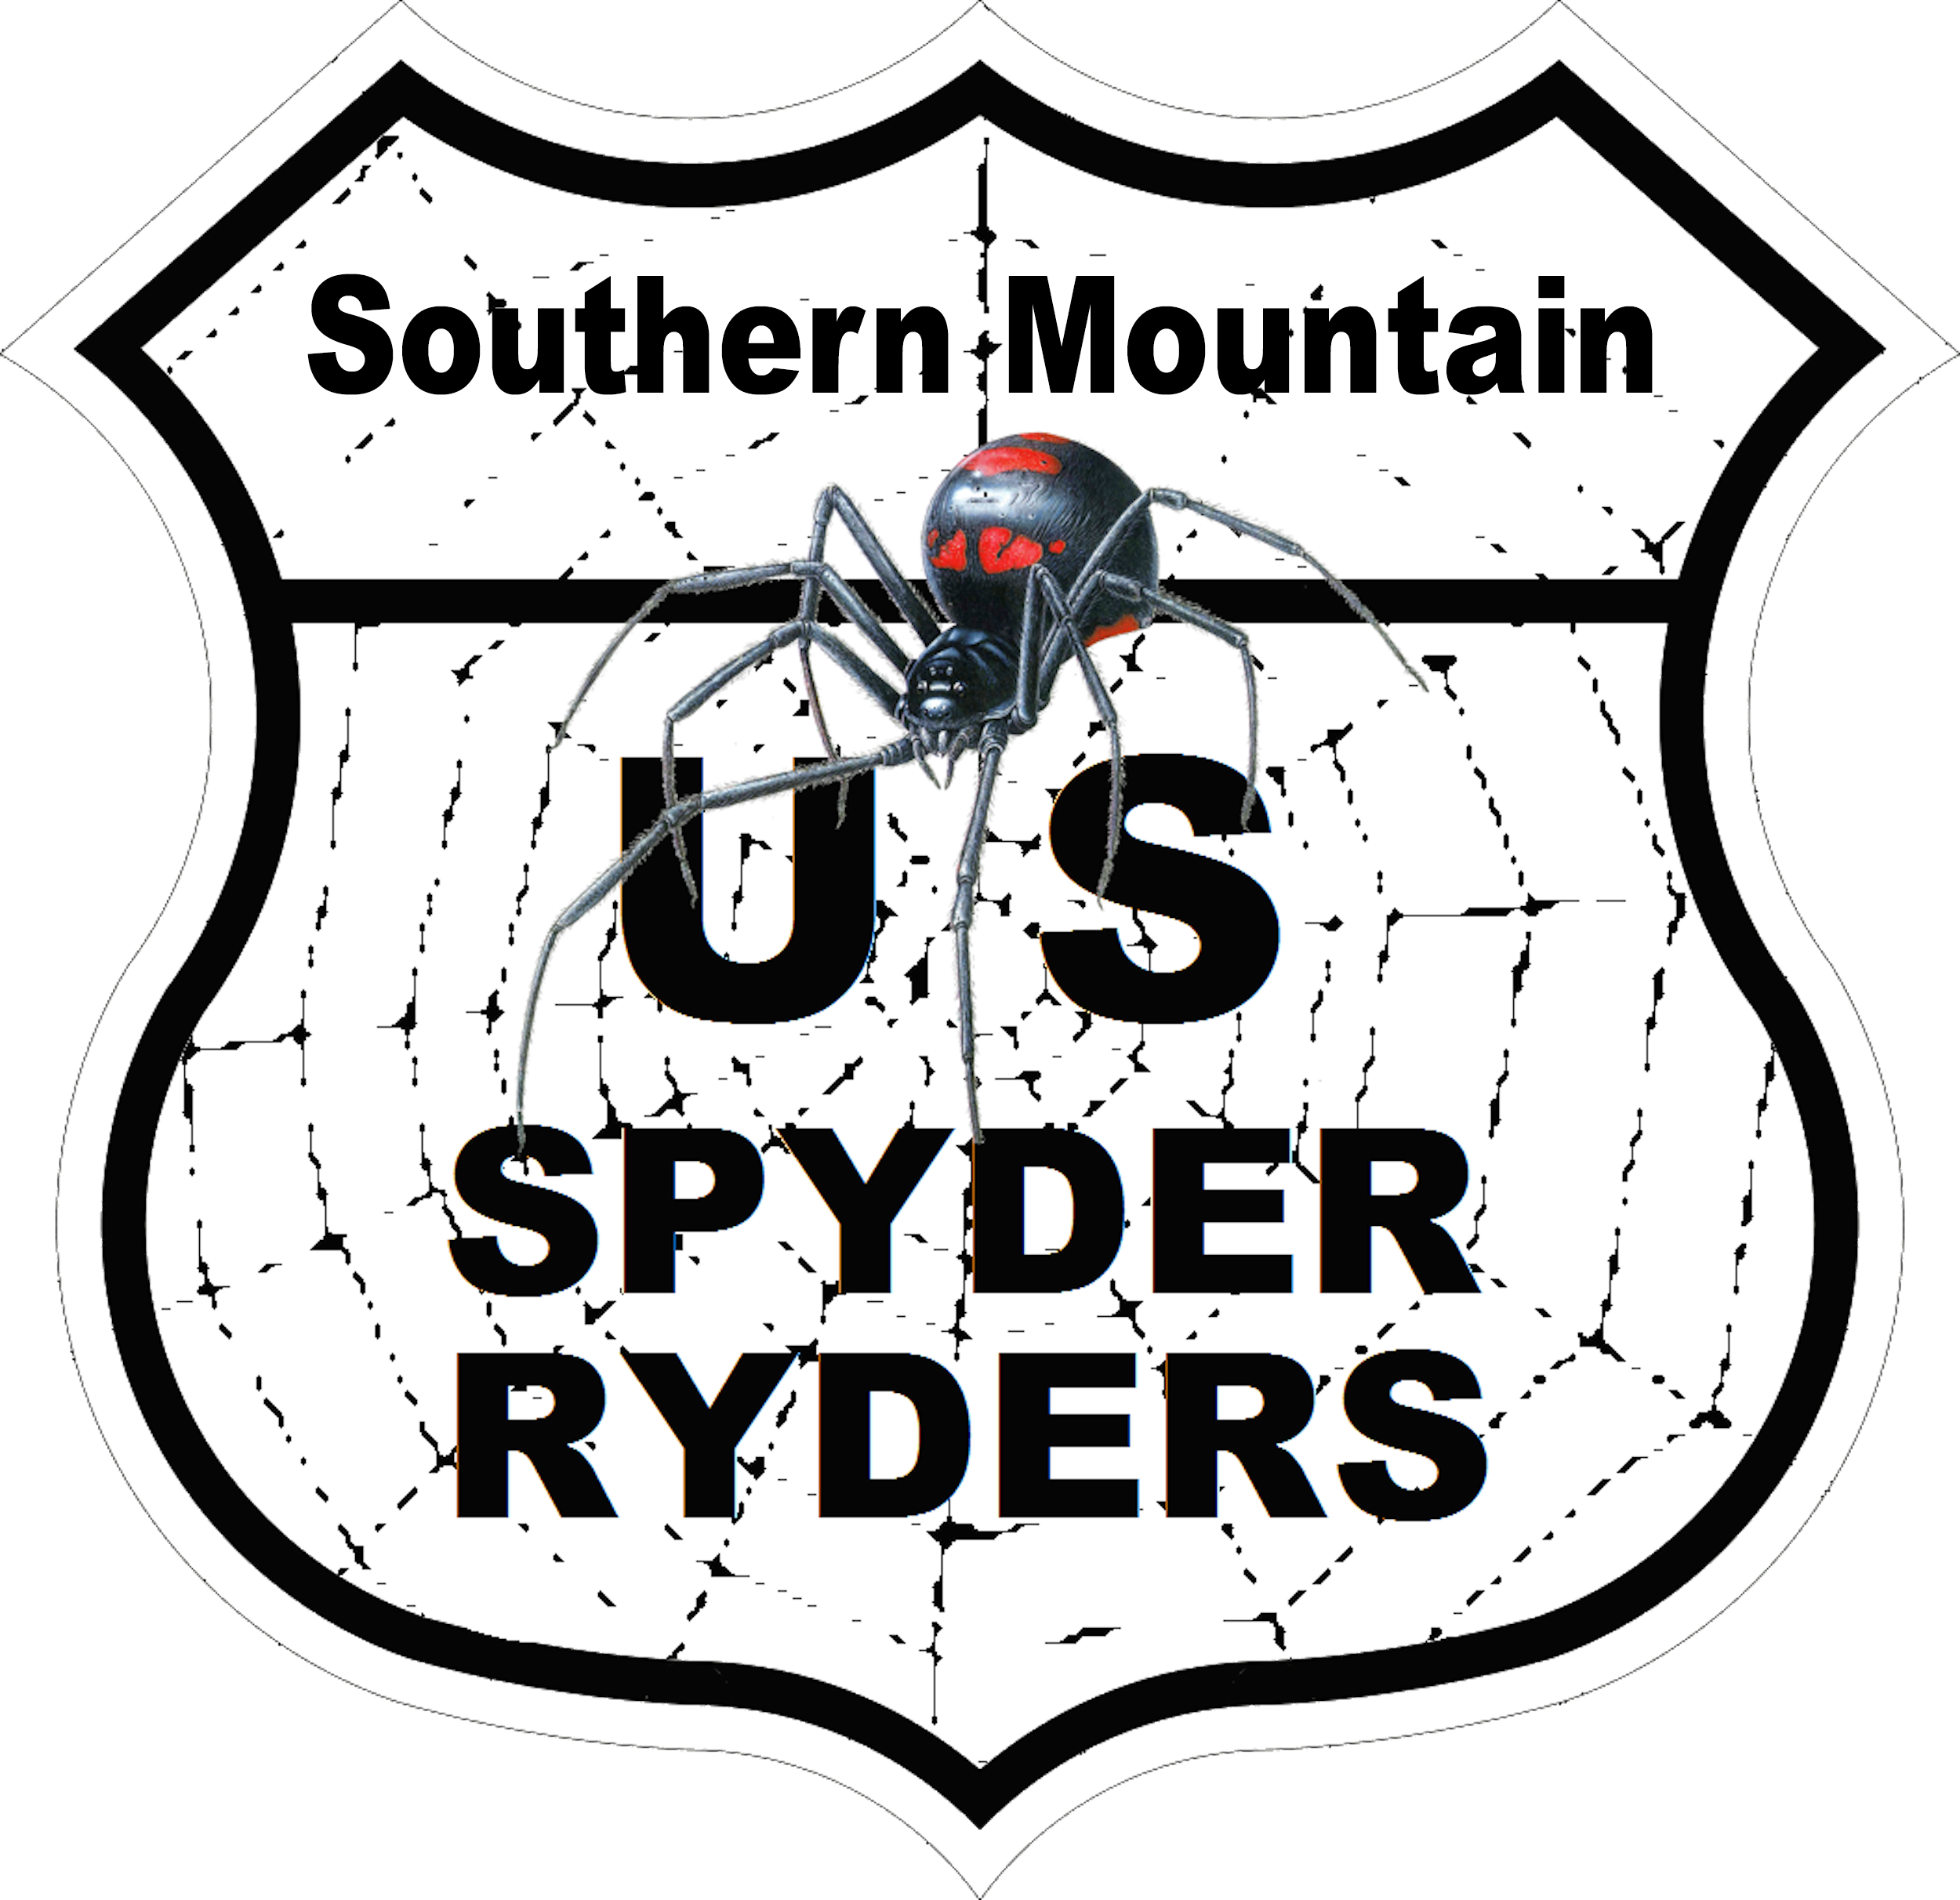 US_Spyder_Ryder_NC Southern Mountain.png